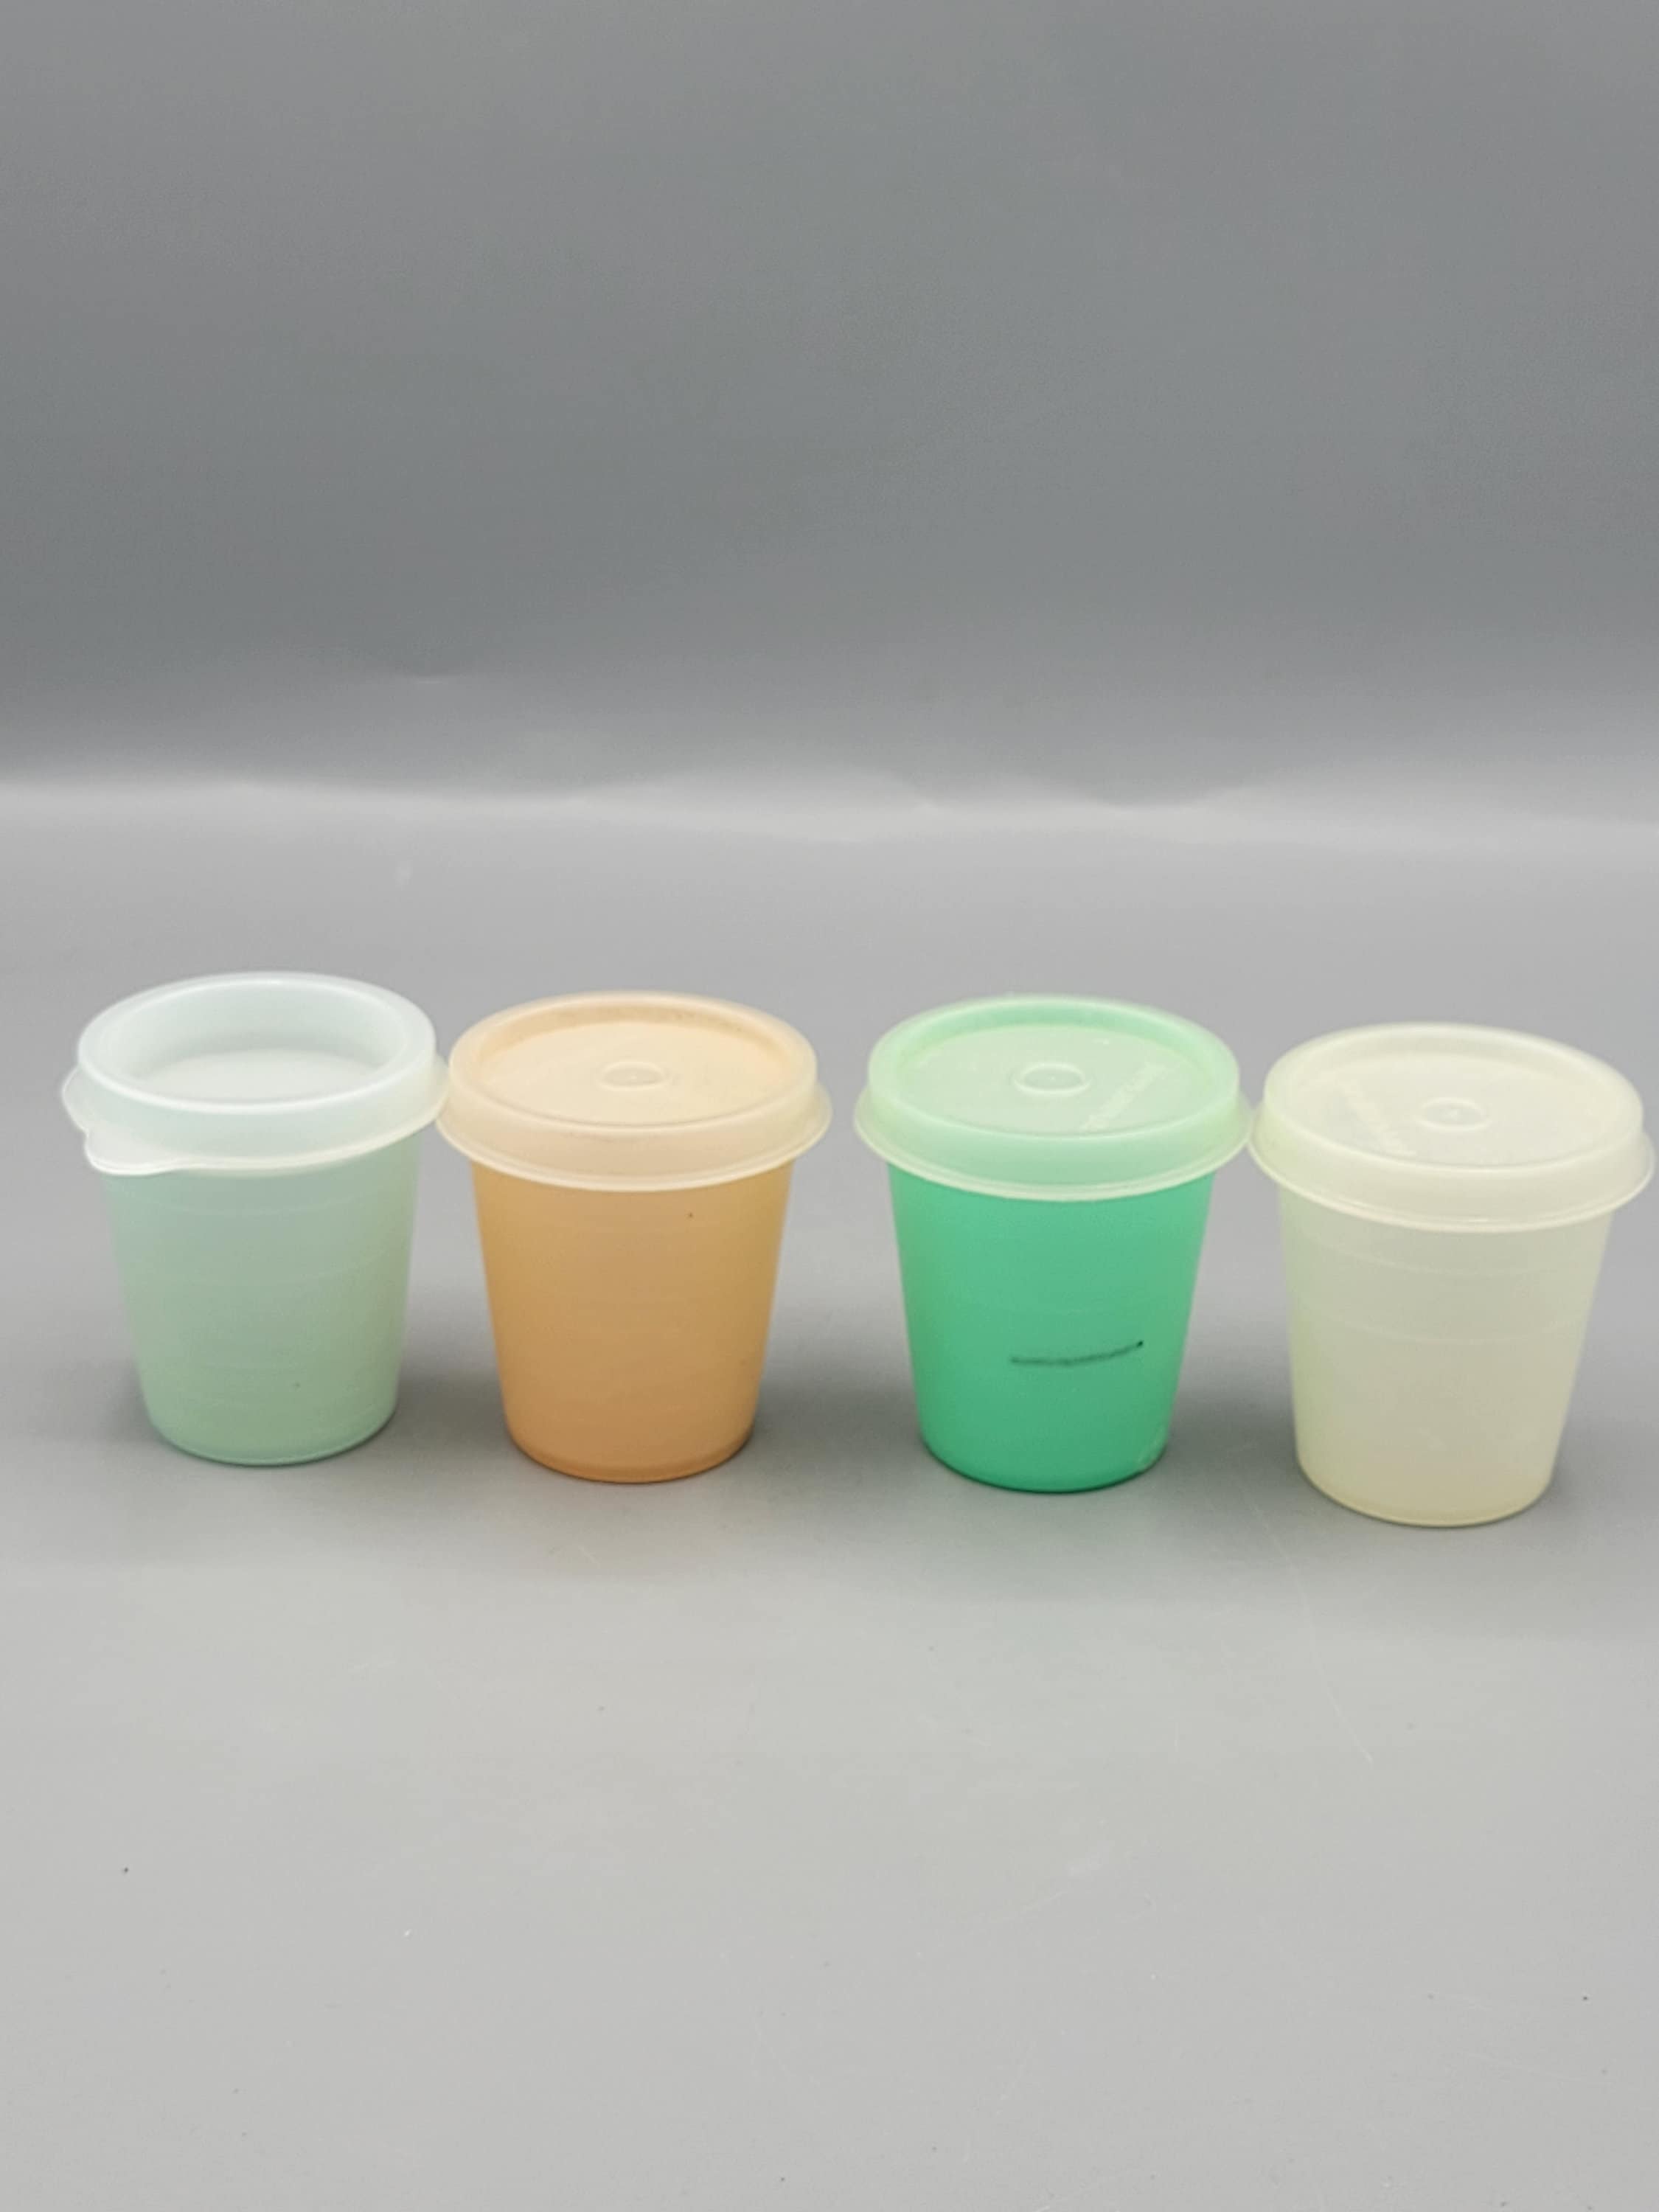 Please avoid vintage Tupperware. This is a kid's 6 oz. cup. It's